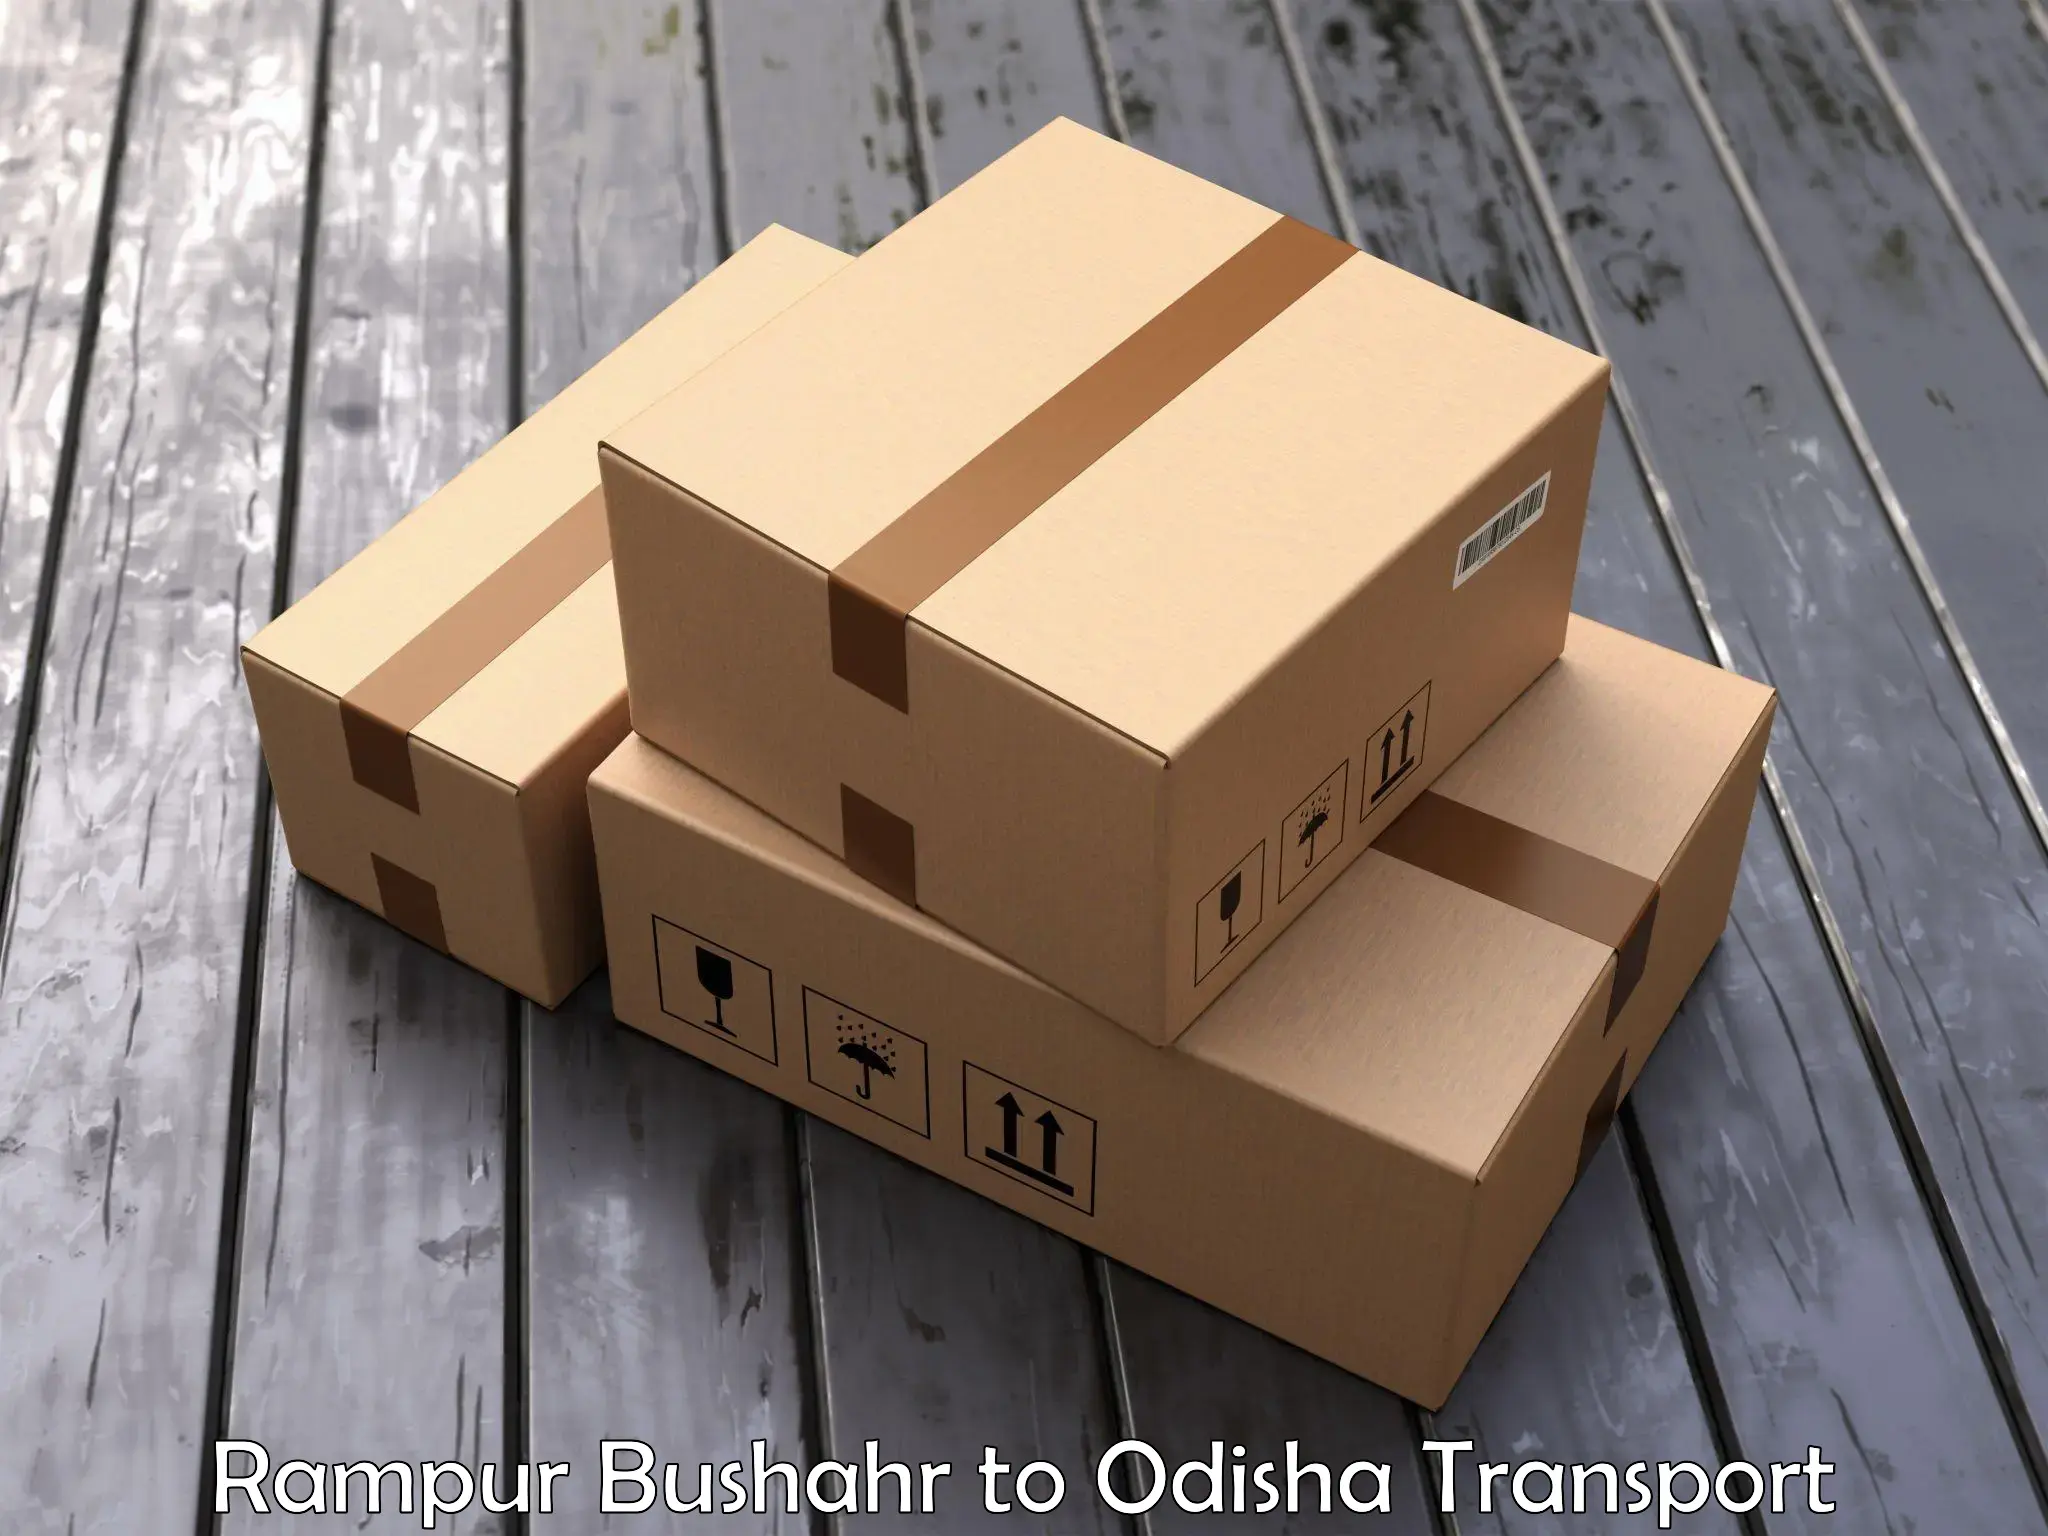 Container transport service Rampur Bushahr to Aul